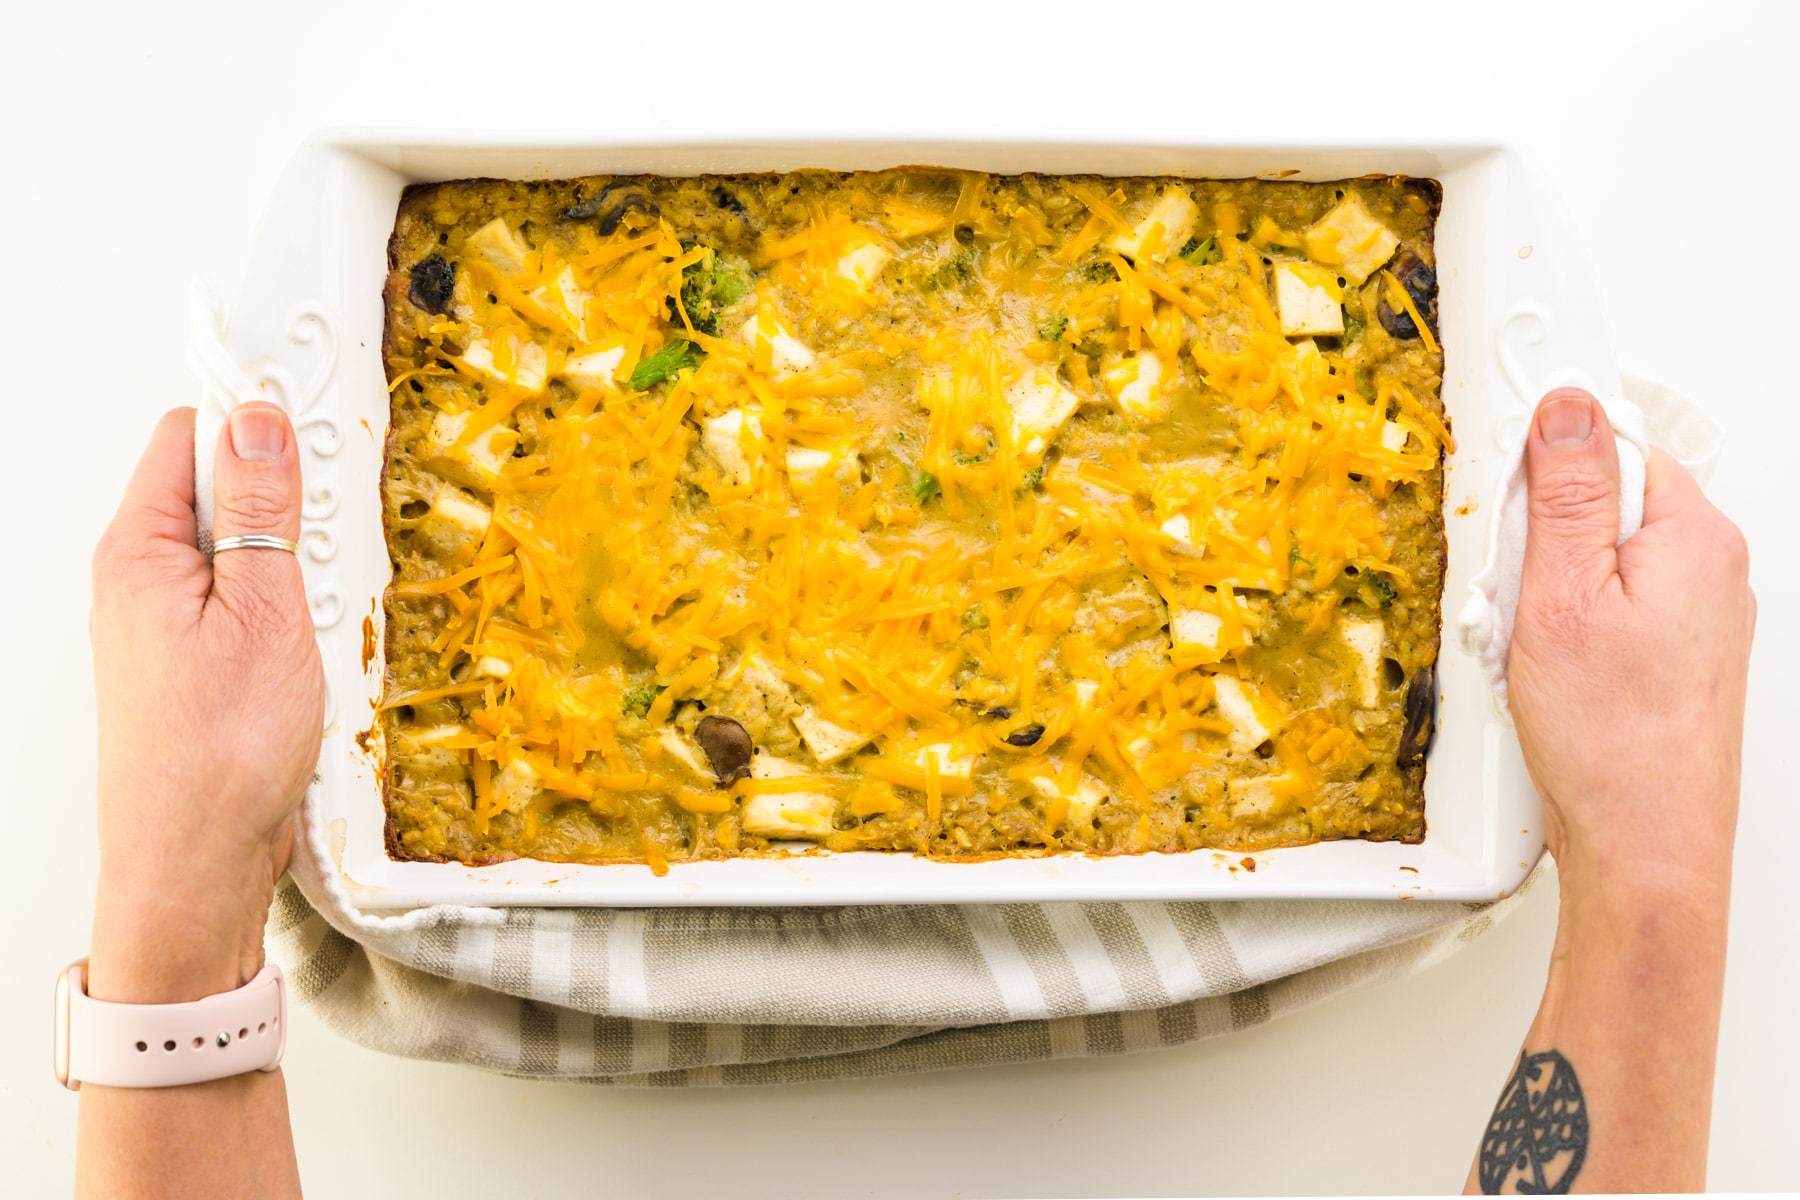 Hands hold both ends of a baking dish with a kitchen towel. The dish holds a cheesy casserole.